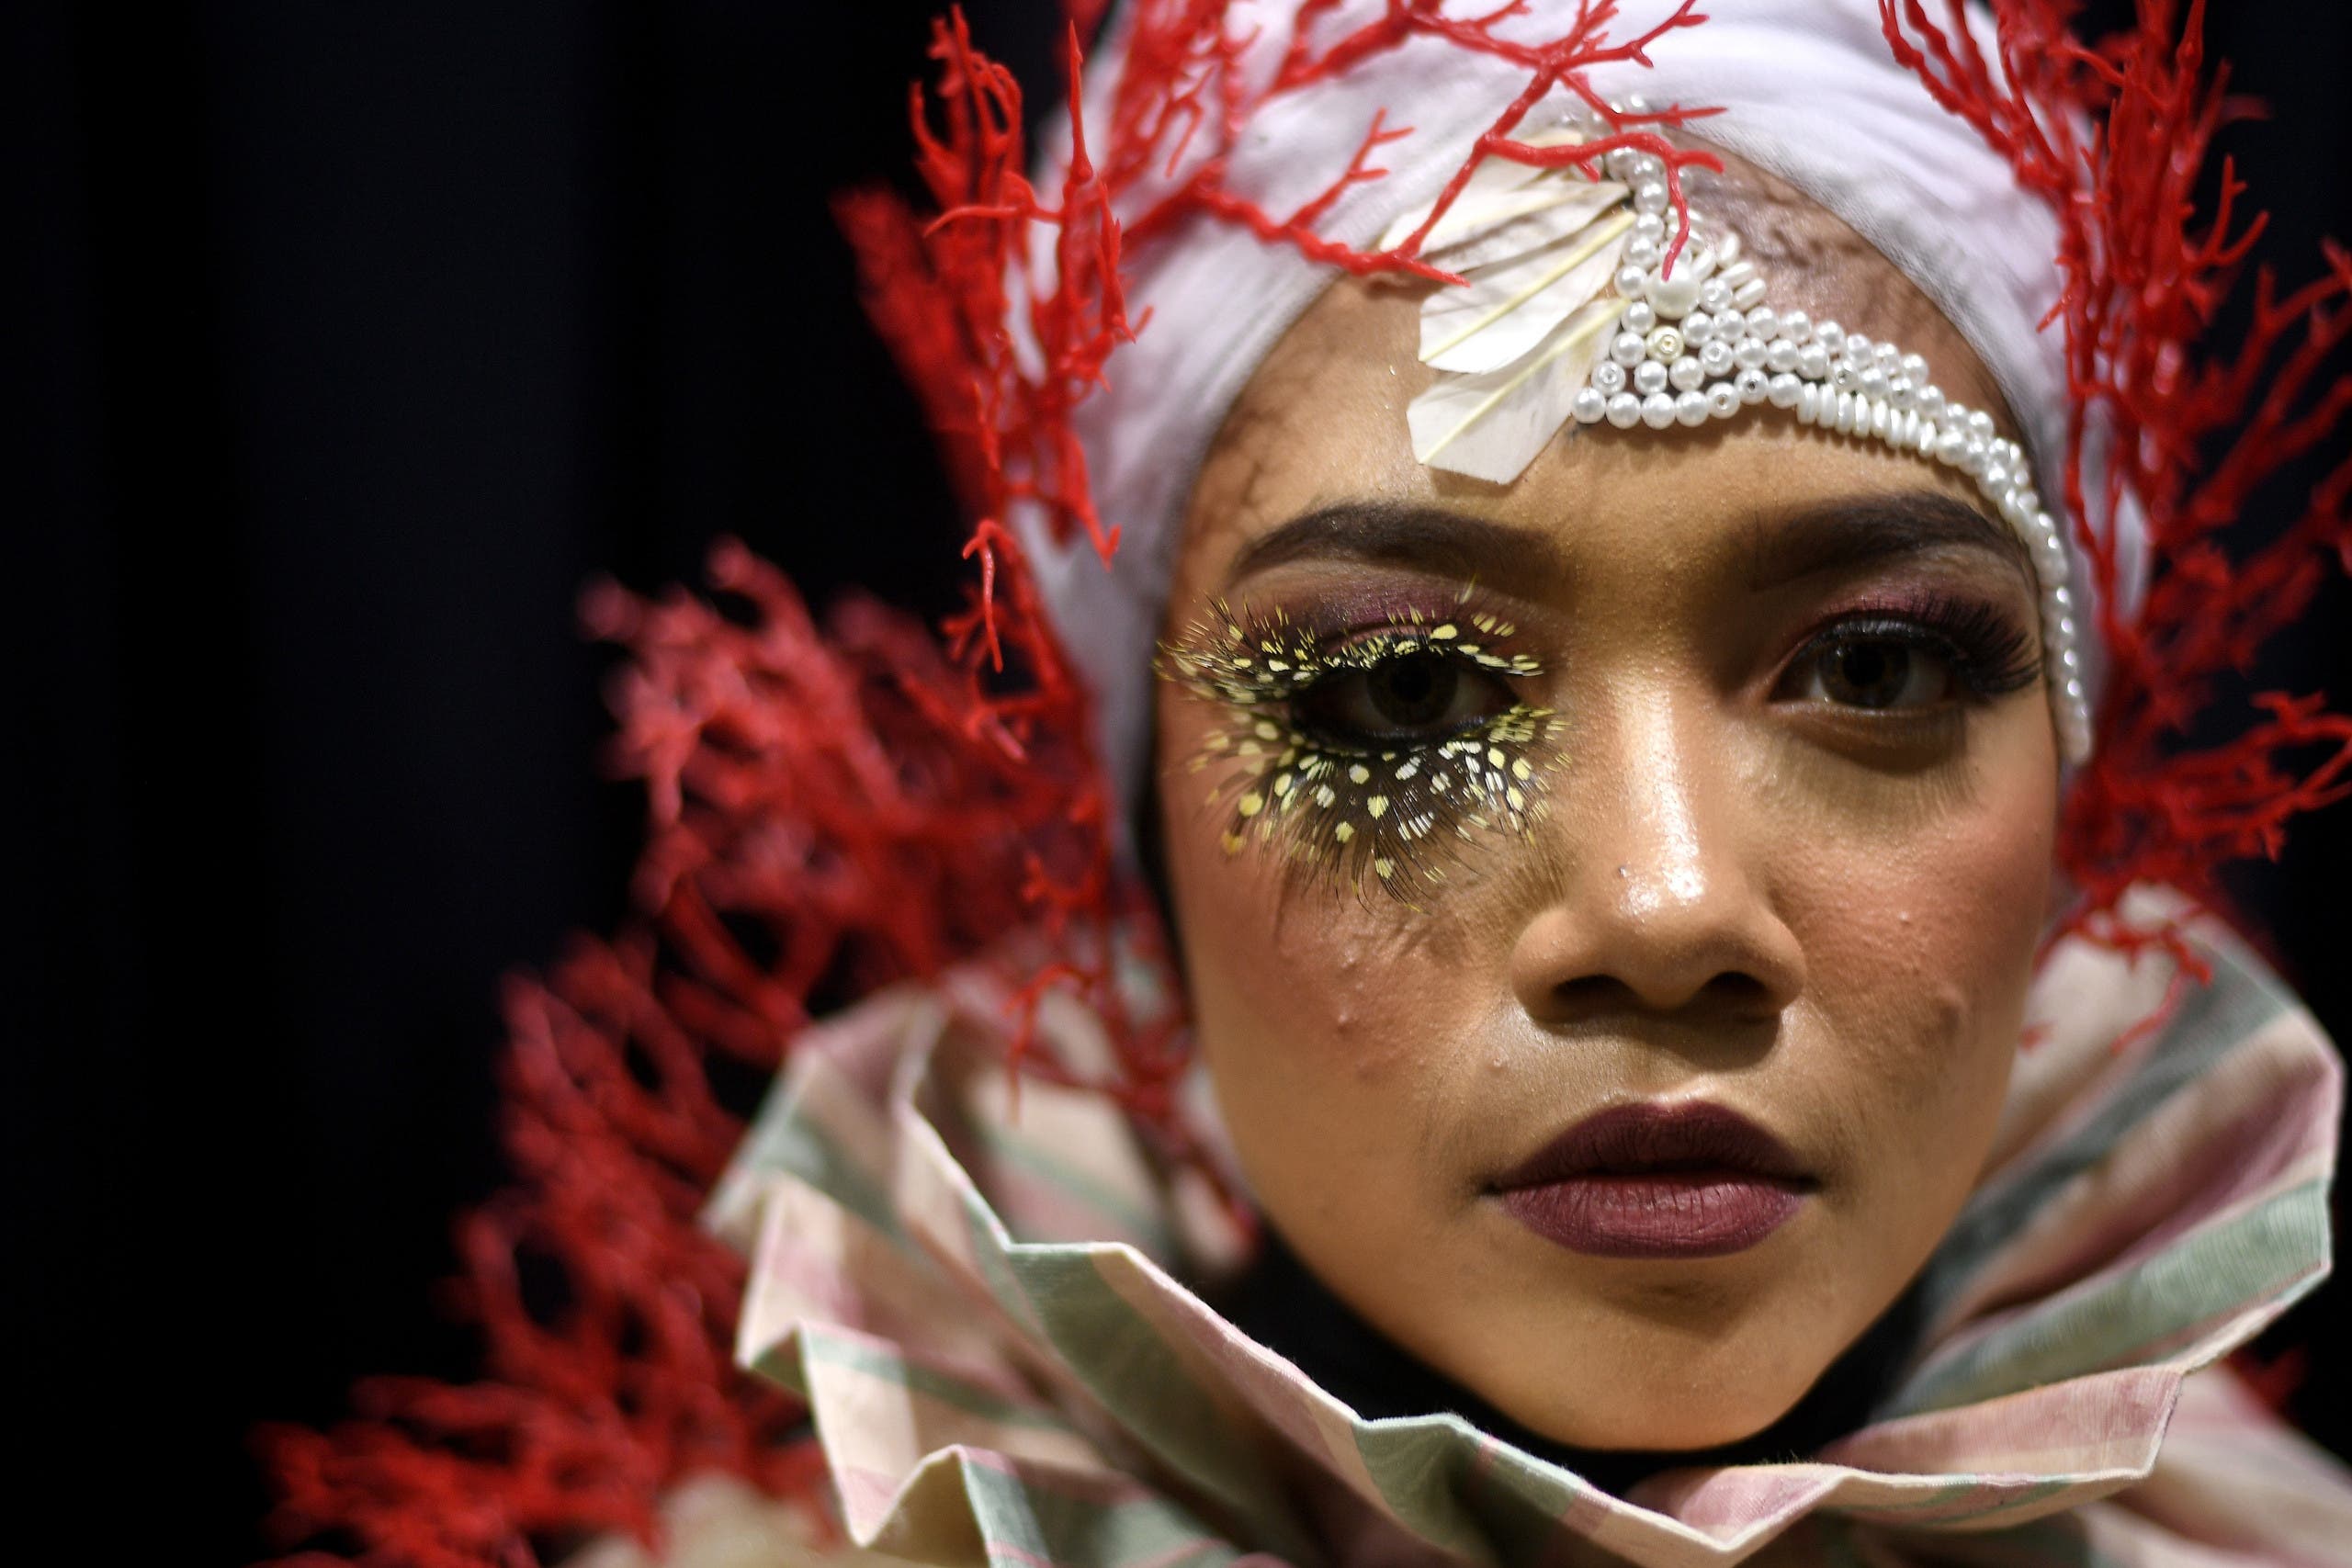  A model at the Malaysian Heritage Make Up Show in Kuala Lumpur on May 6, 2017. (AFP)